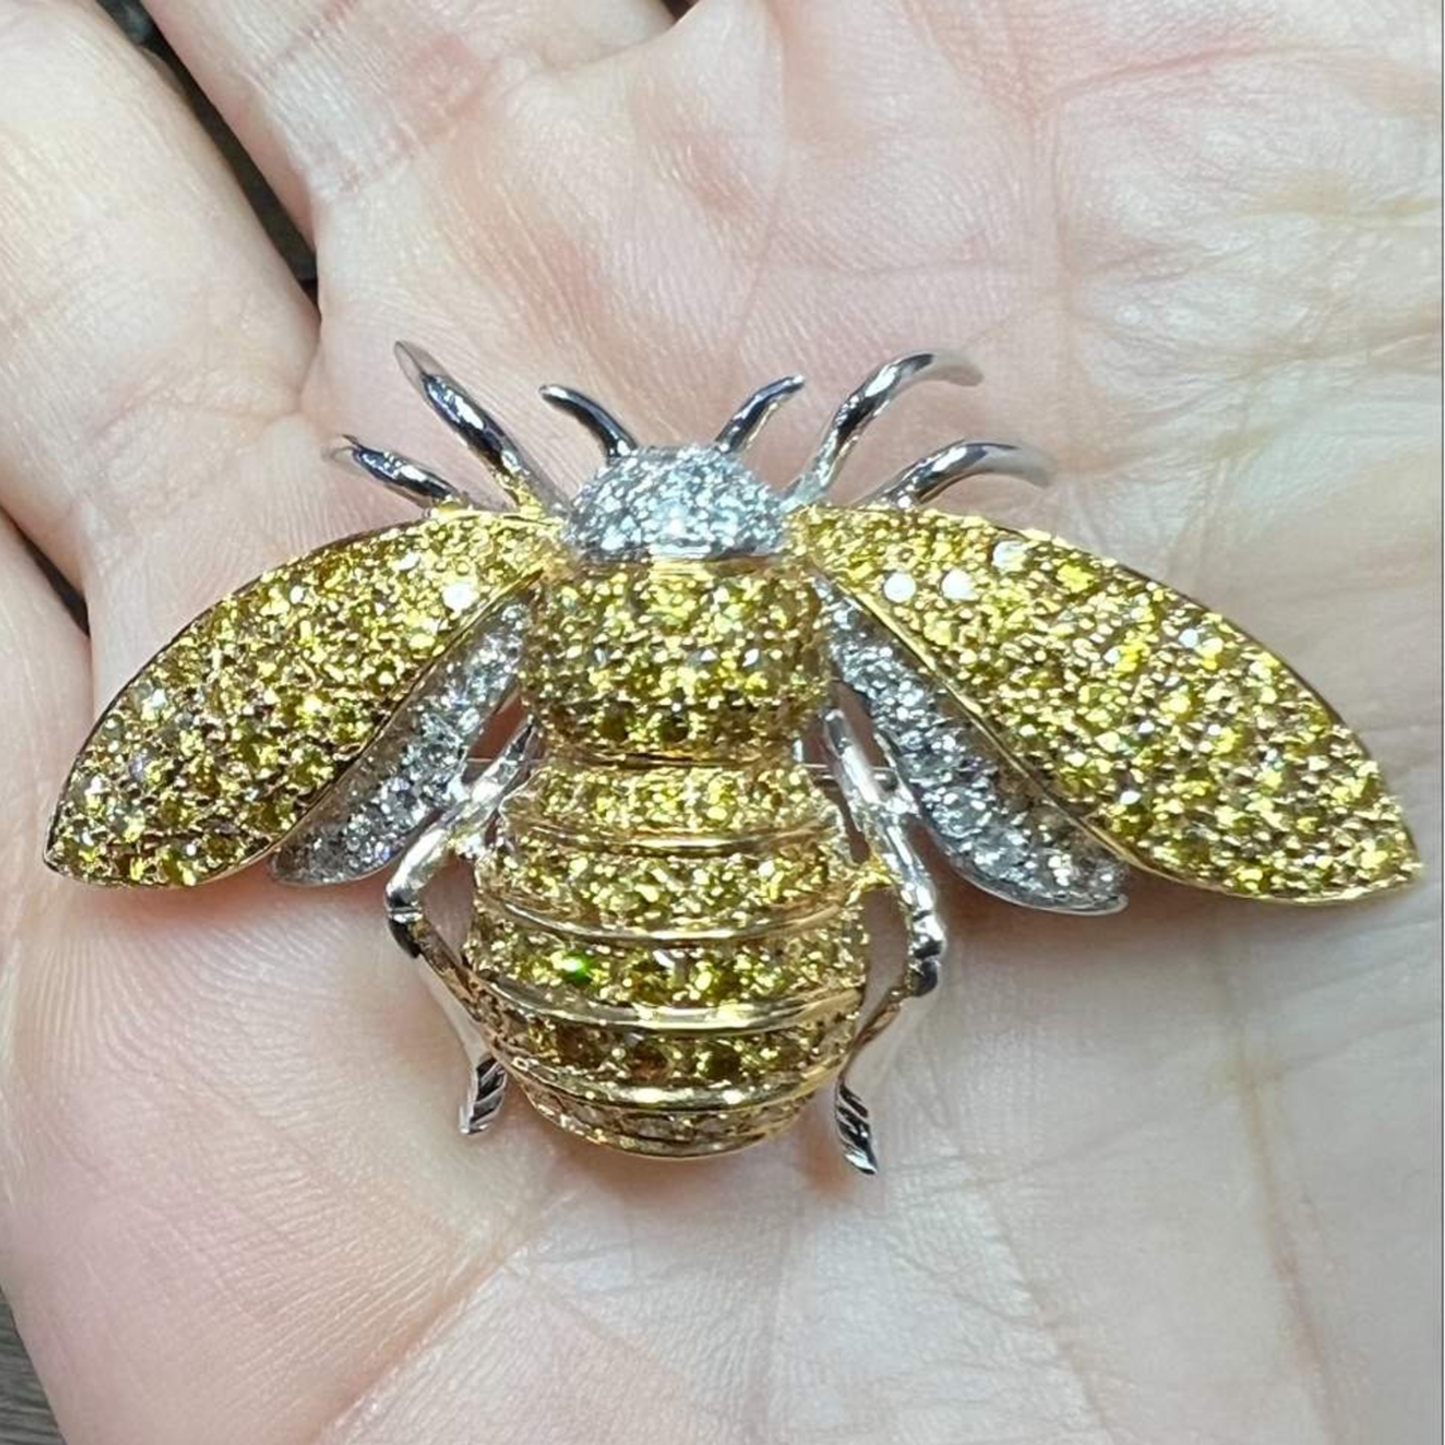 Post-1980s 18KT Yellow & White Gold Diamond Bumble Bee Brooch in hand